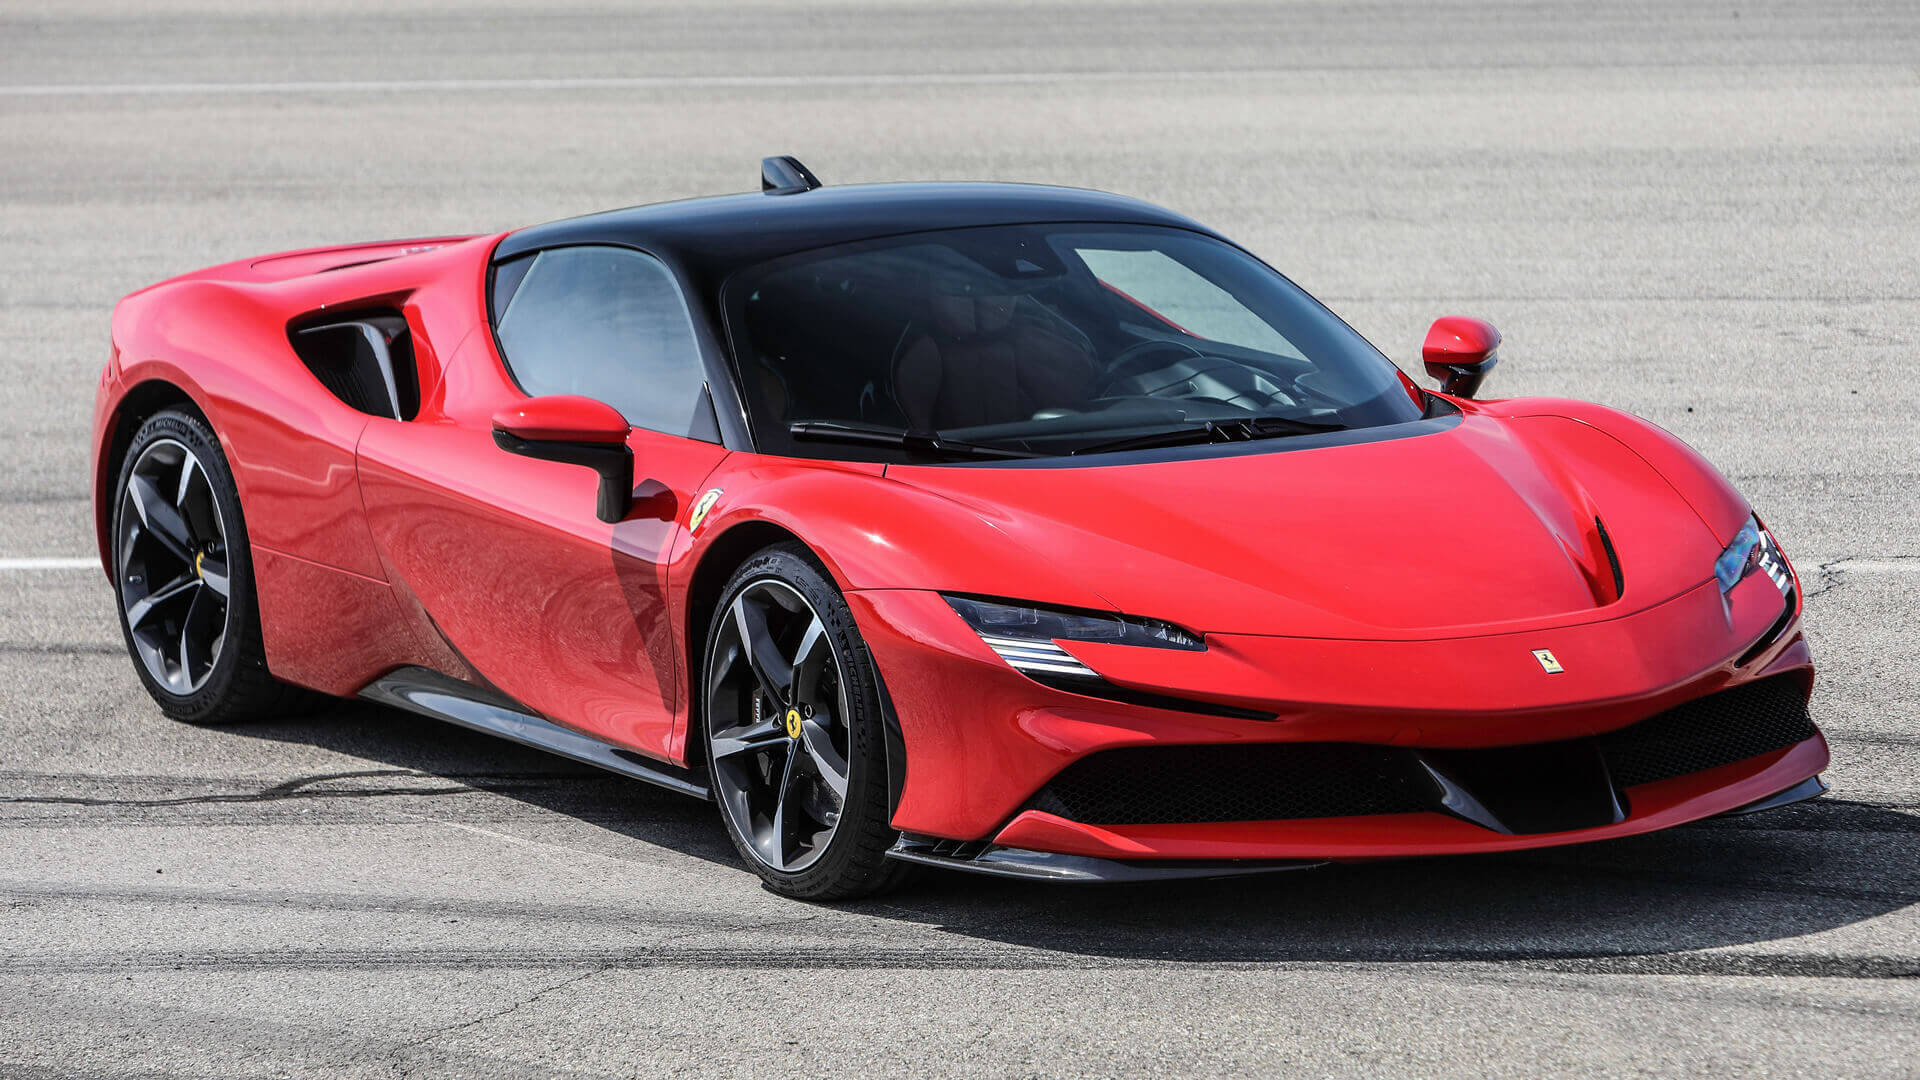 Ferrari SF90 Stradale - specifications, photos, video, review